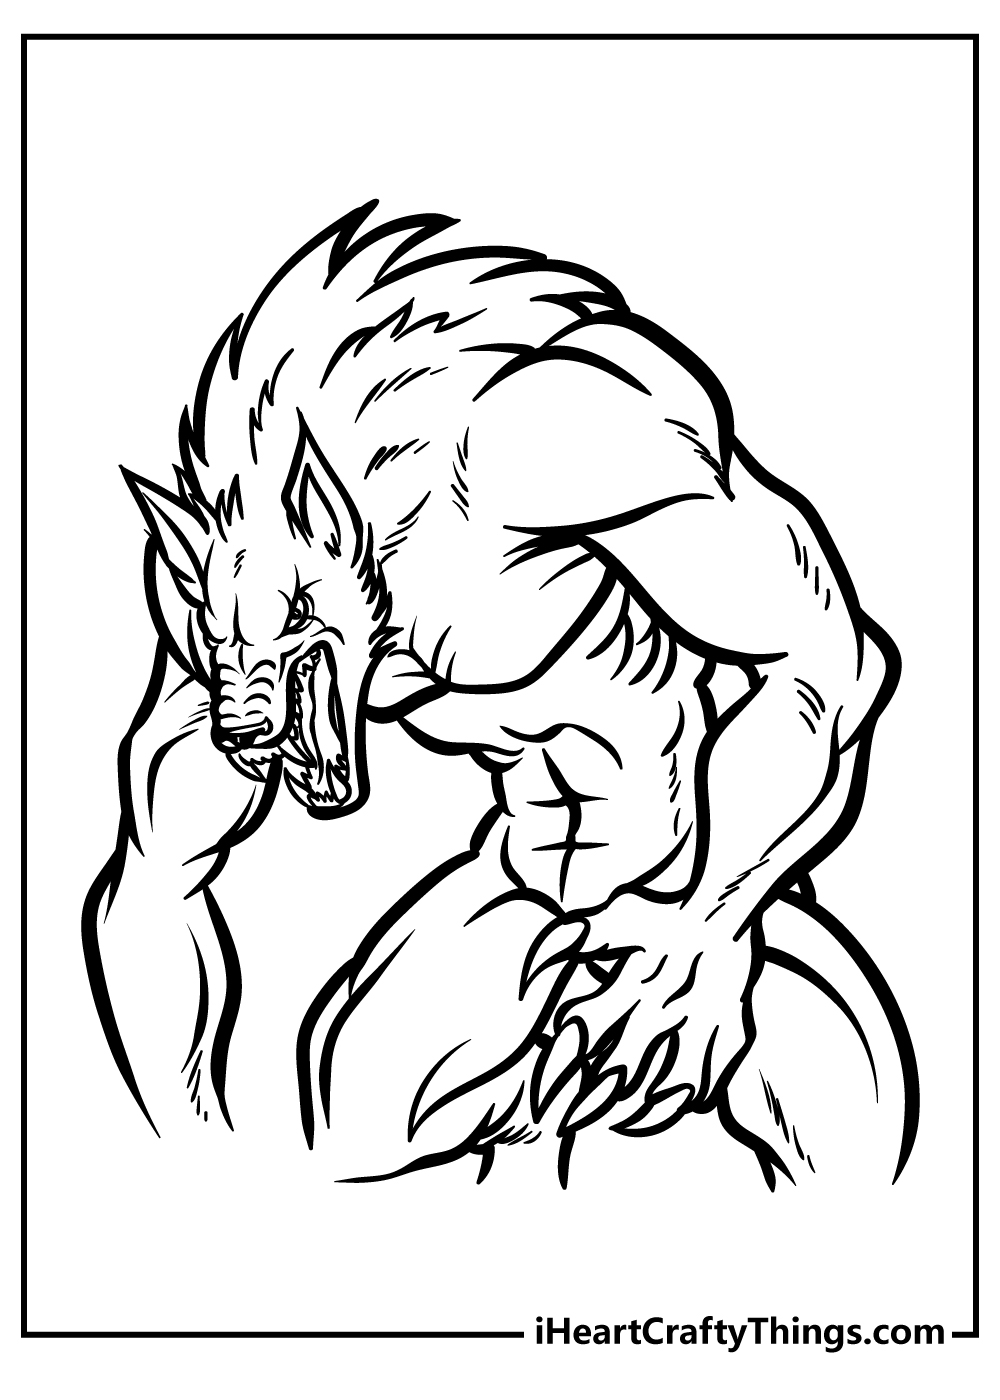 Werewolf Coloring Pages for adults free printable